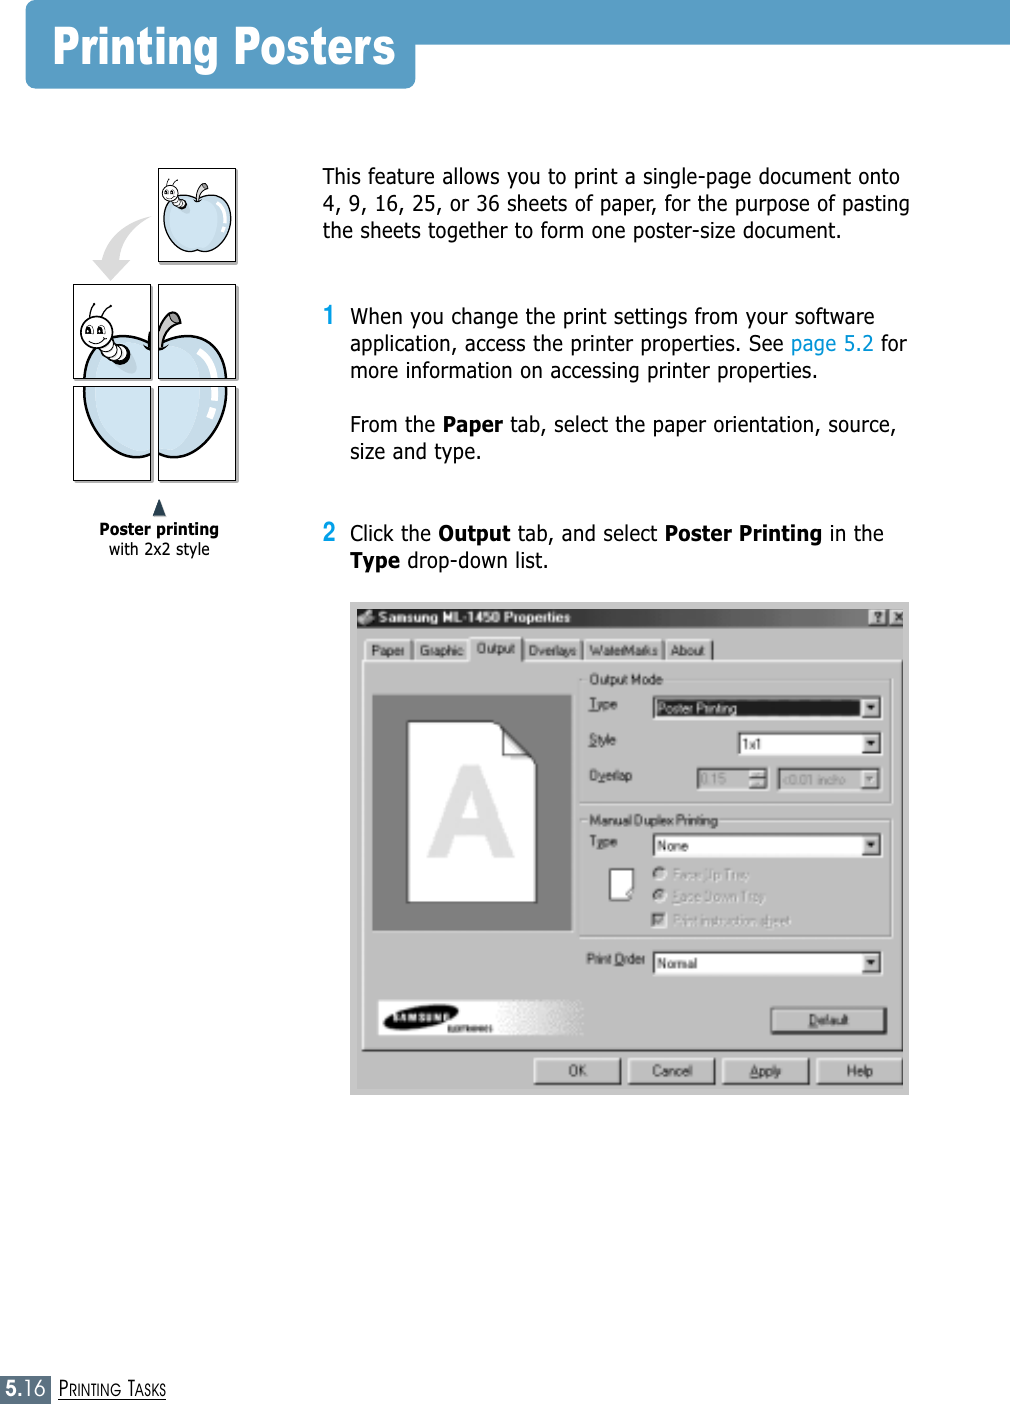 5.16PRINTING TASKSPrinting PostersThis feature allows you to print a single-page document onto4, 9, 16, 25, or 36 sheets of paper, for the purpose of pastingthe sheets together to form one poster-size document.1When you change the print settings from your softwareapplication, access the printer properties. See page 5.2 formore information on accessing printer properties.From the Paper tab, select the paper orientation, source,size and type.2Click the Output tab, and select Poster Printing in theType drop-down list.➐➐➐➐Poster printingwith 2x2 style